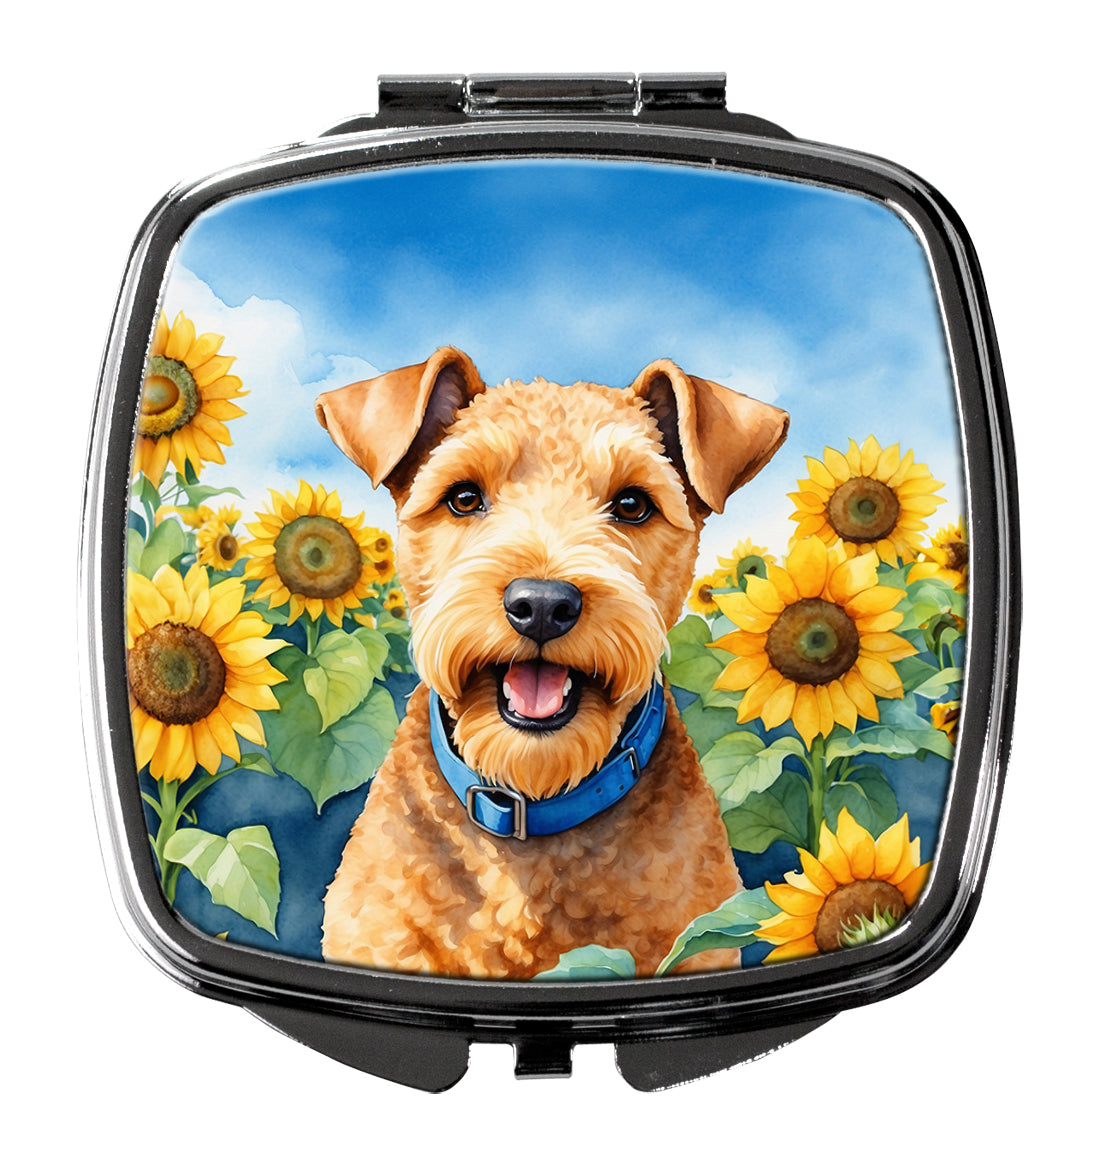 Buy this Lakeland Terrier in Sunflowers Compact Mirror